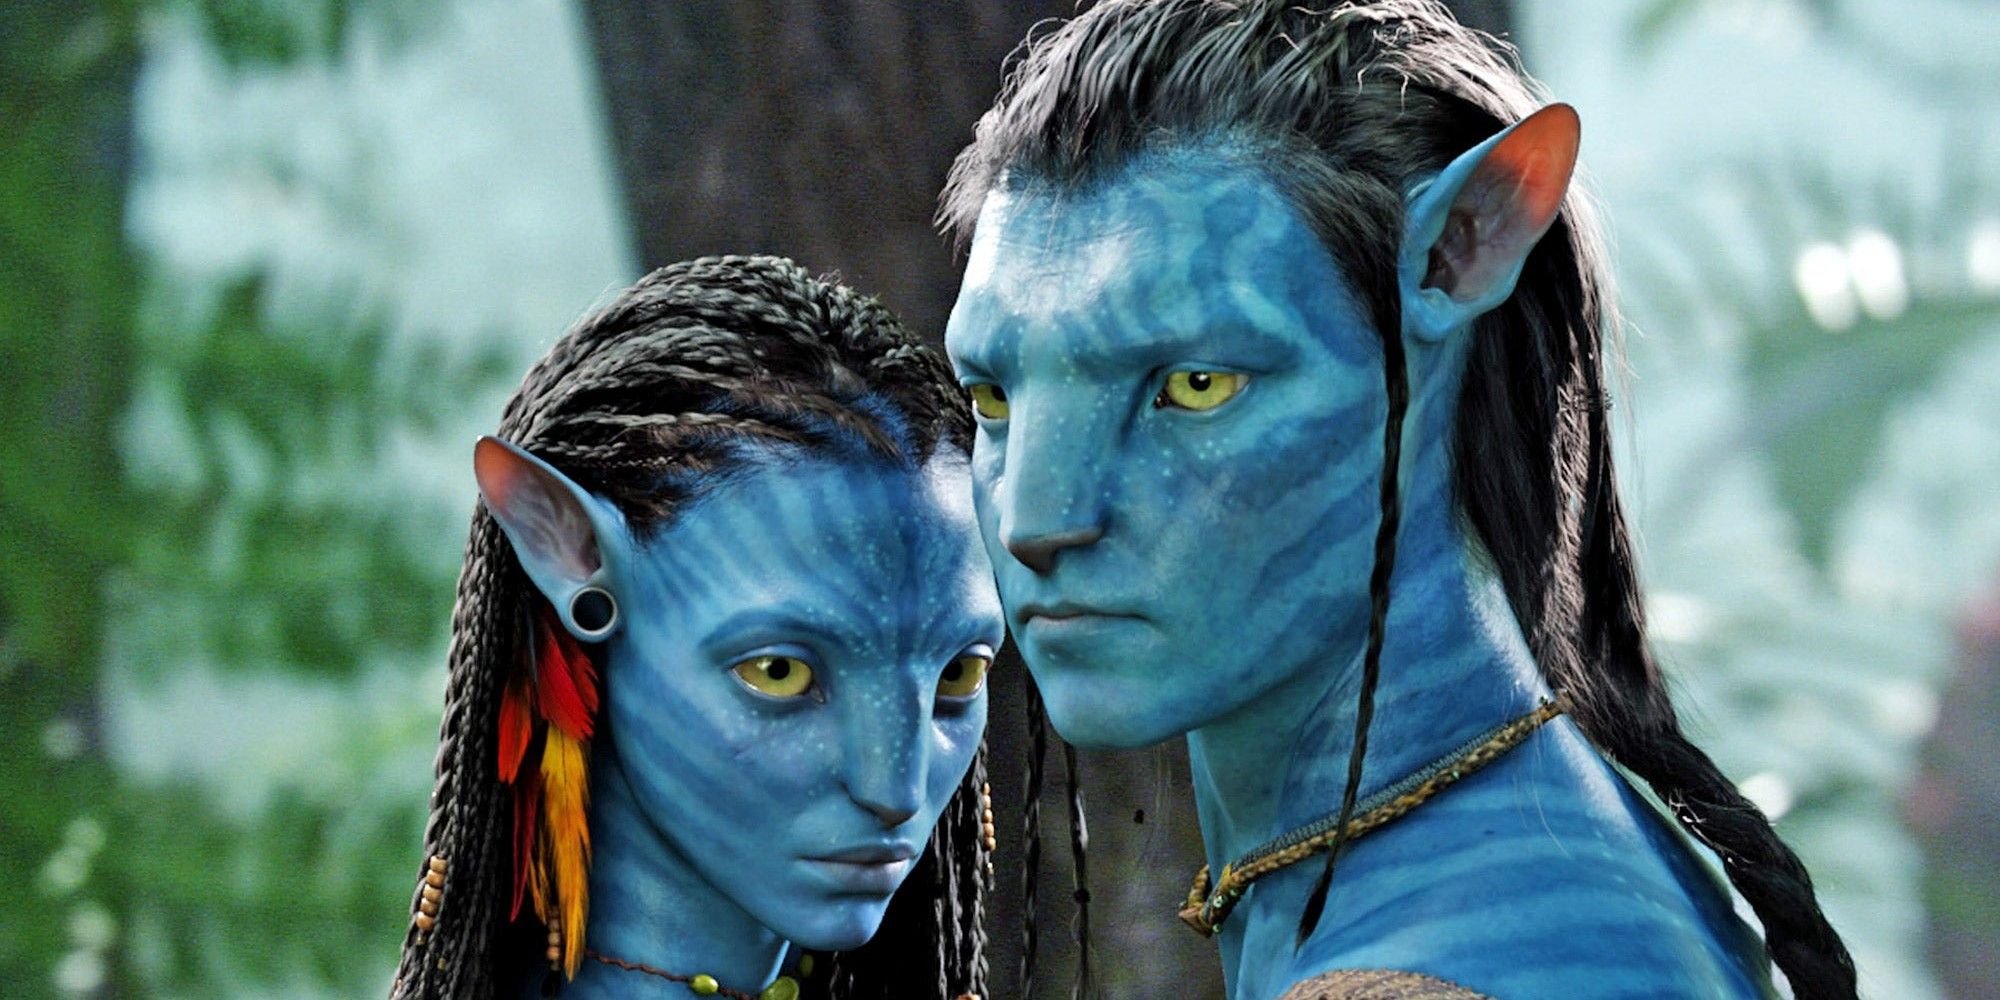 Theory Avatar 2 Sets Up A New Navi Villain For Its Sequel